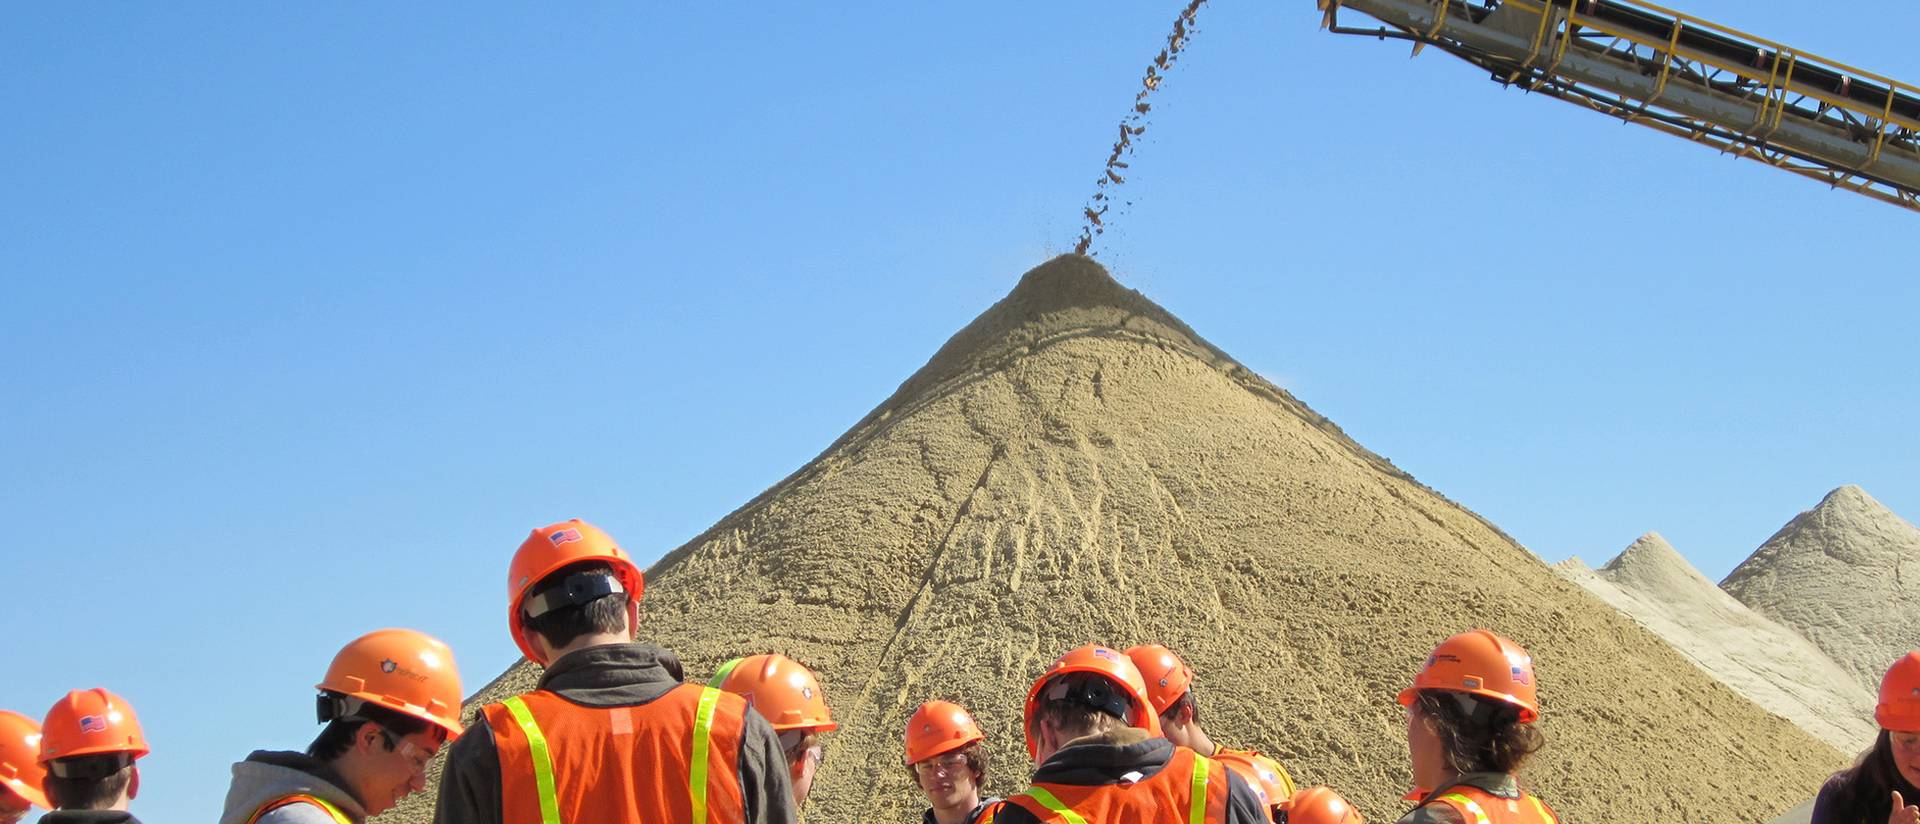 UW-Eau Claire students enrolled in Dr. Brian Mahoney's "Sedimentation and Stratigraphy" class examine grains of sand during a tour of Wisconsin Industrial Sand Co.'s mining operations.